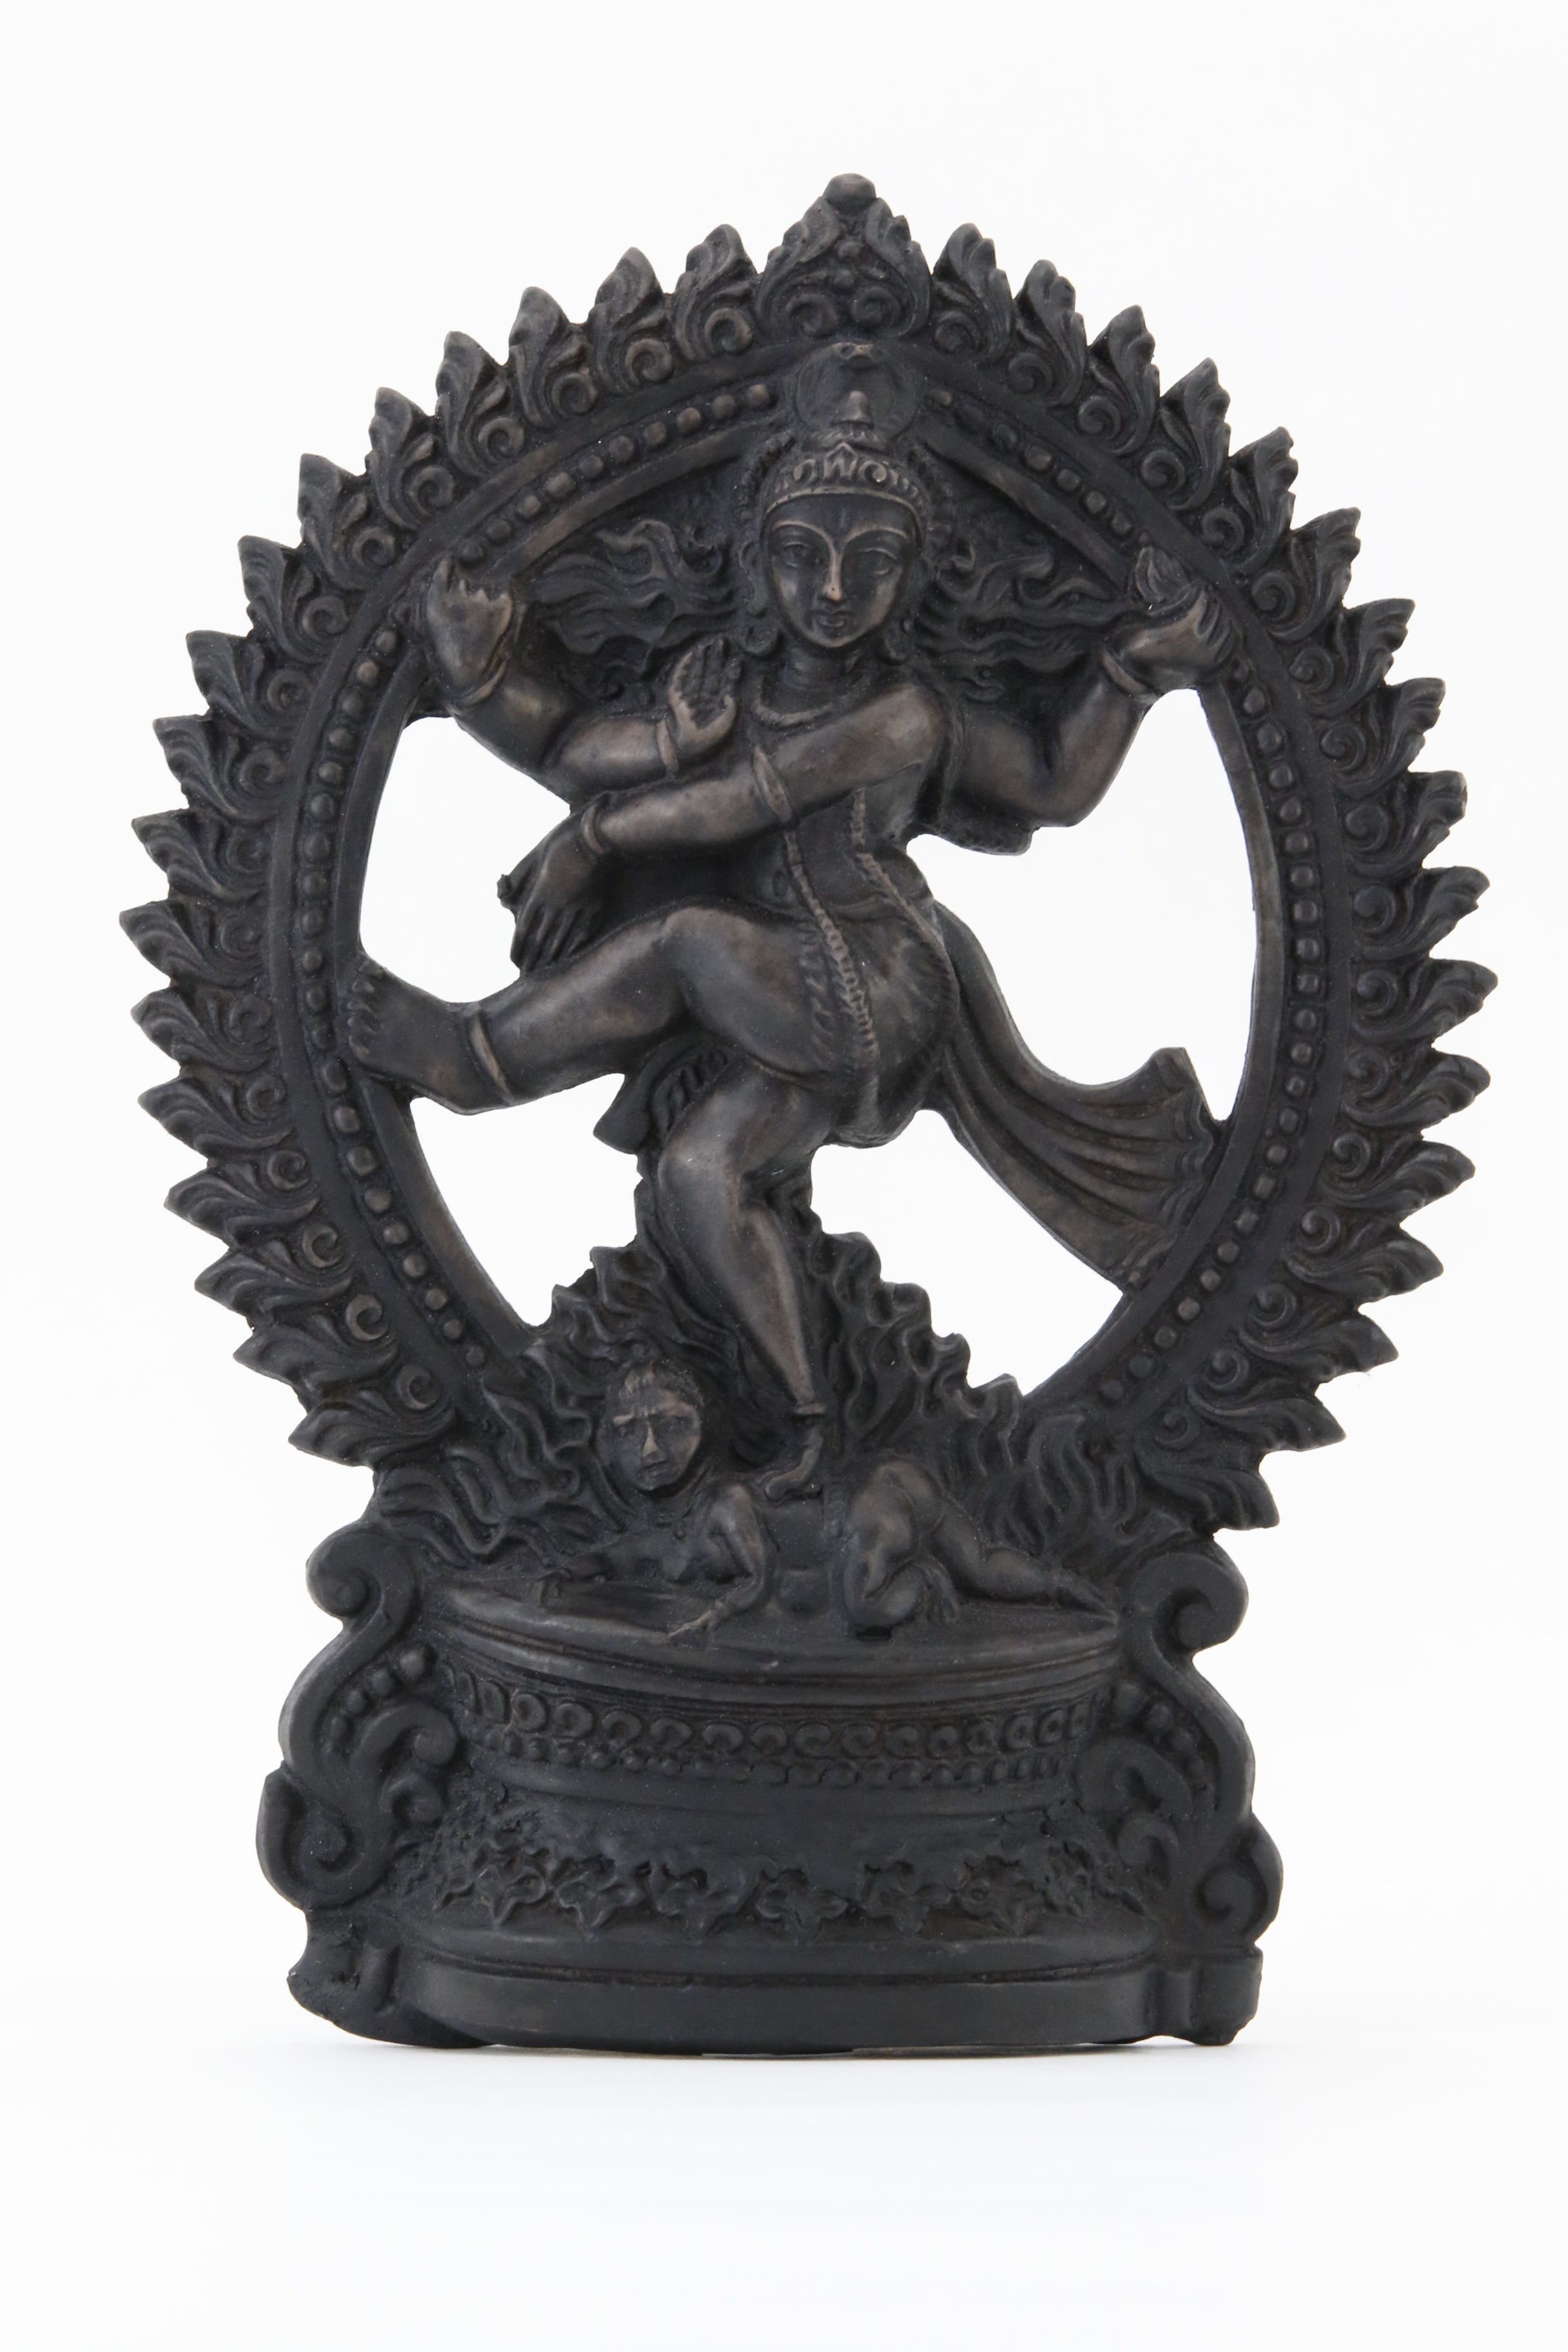 What is the story of the Nataraj form of Shiva? - Quora